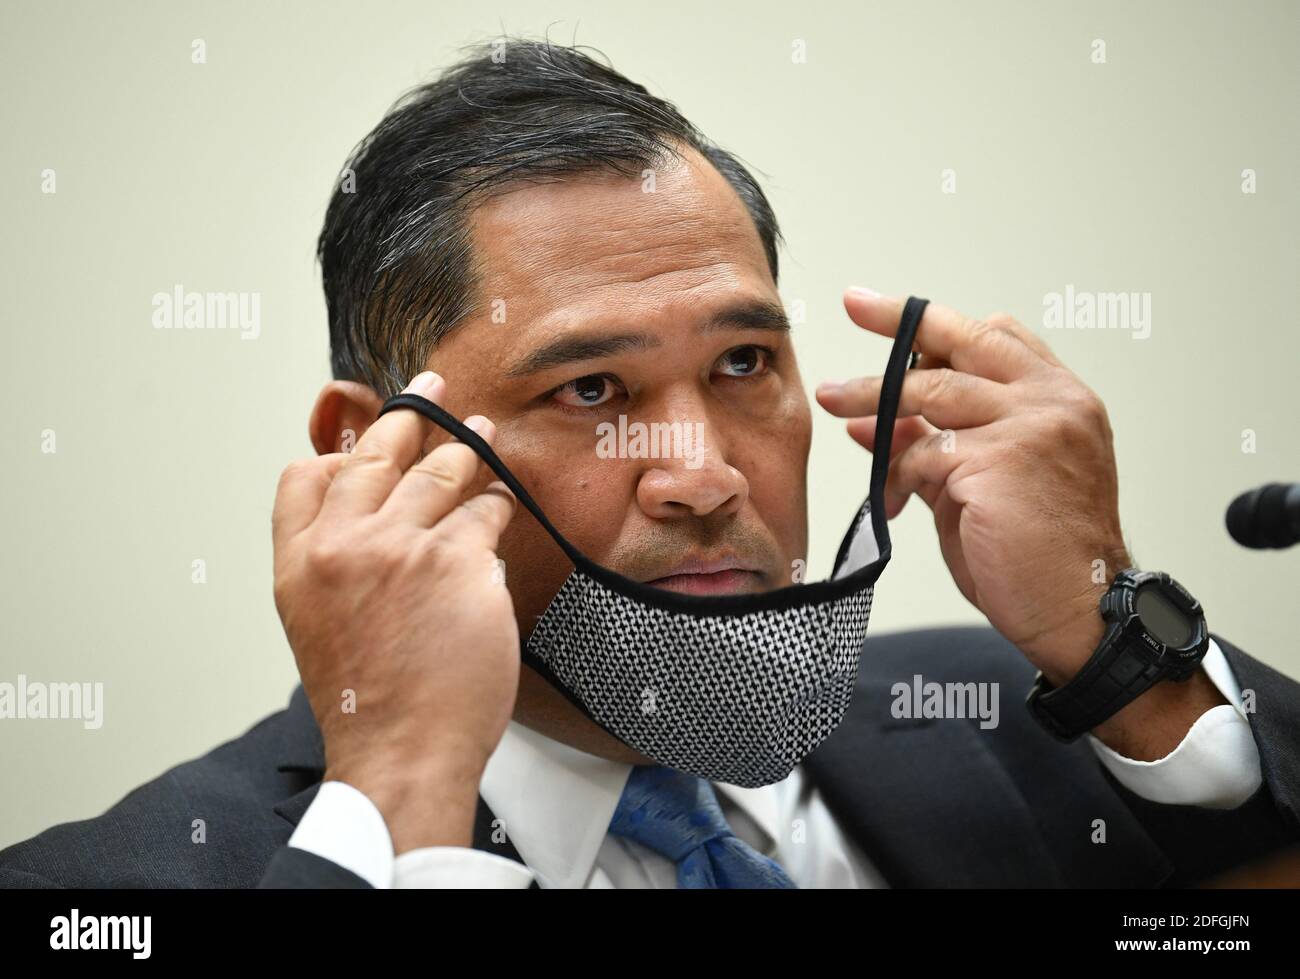 Brian Bulatao, Under Secretary of State for Management, adjusts his face mask as he testifies before a House Committee on Foreign Affairs hearing looking into the firing of State Department Inspector General Steven Linick, on Capitol Hill in Washington, D.C. on Wednesday, September 16, 2020. The foreign affairs committee issued the subpoenas as part of the panel's probe into accusations that Linick was fired while investigating Secretary of State Mike Pompeo's role in a controversial $8 billion weapons sale to Saudi Arabia. Photo by Kevin Dietsch/Pool/ABACAPRESS.COM Stock Photo